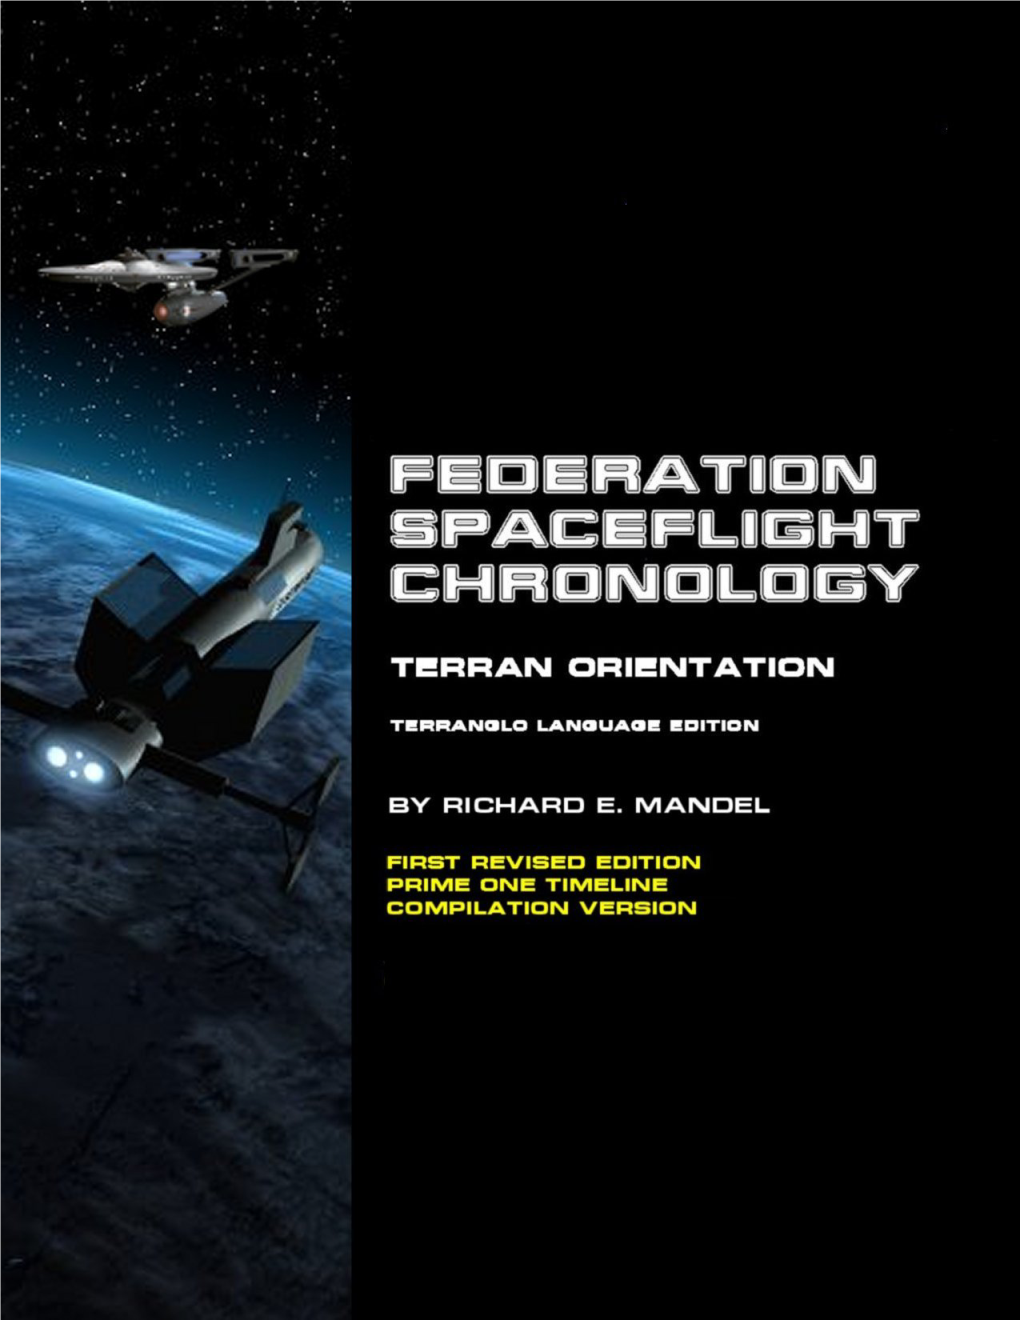 Federation Spaceflight Chronology, First Revised